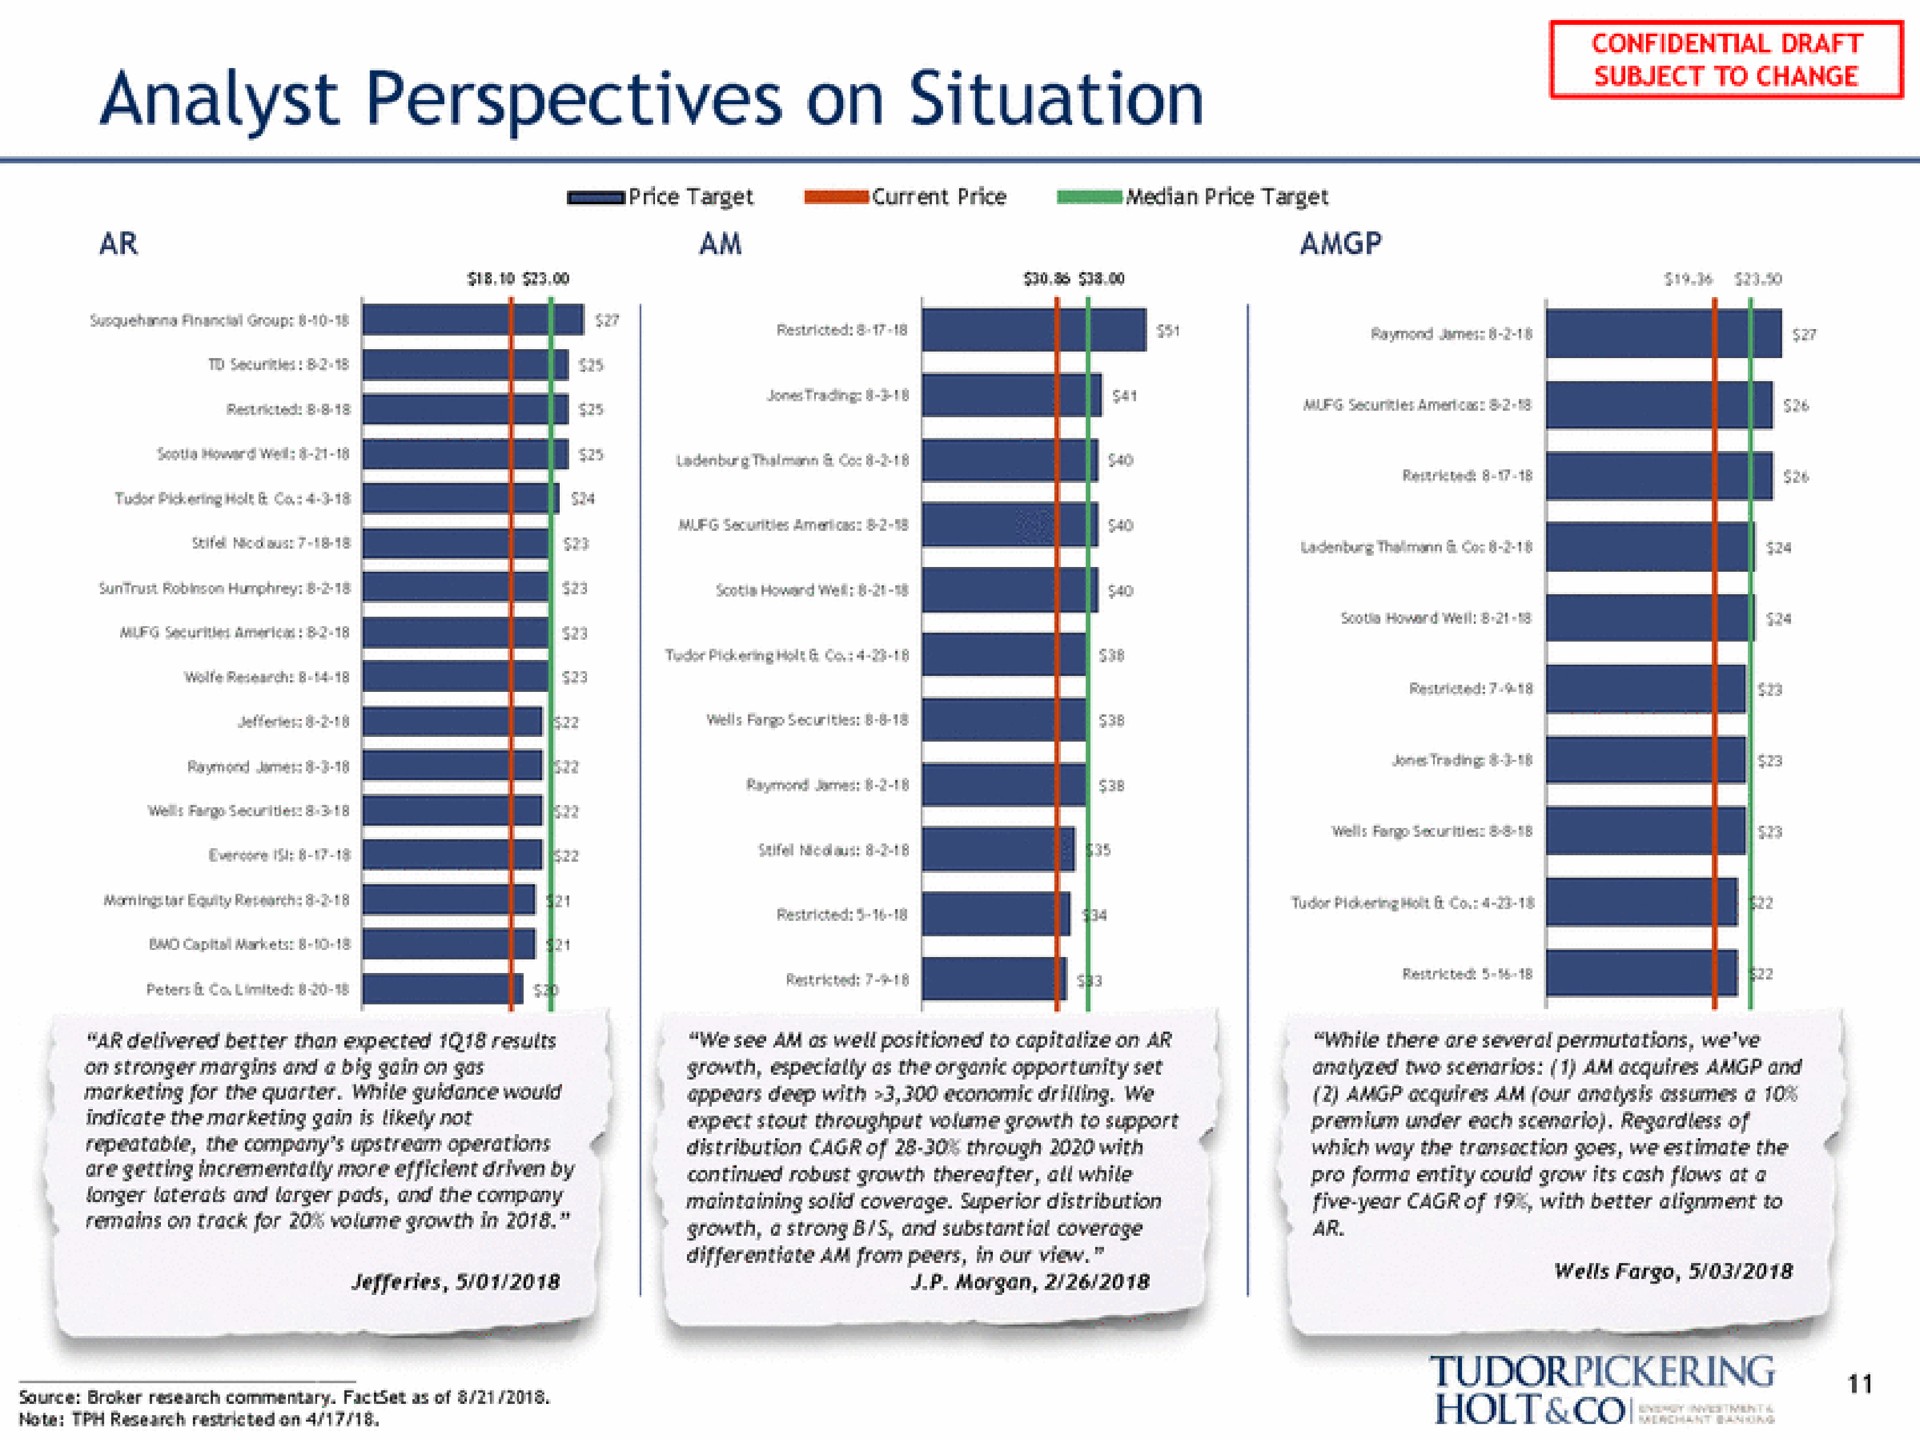 analyst perspectives on situation | Tudor, Pickering, Holt & Co